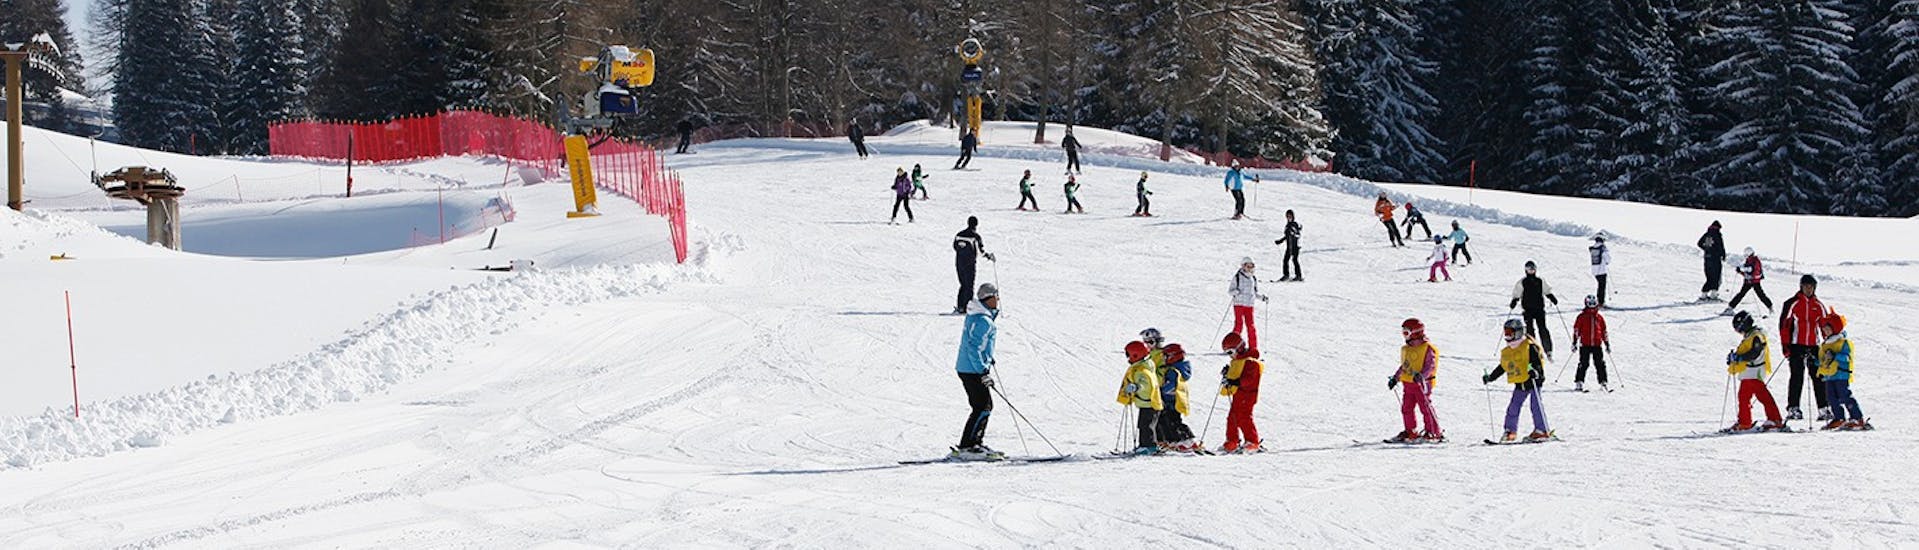 Slopes where the Kids Ski Lessons (6-14 y.) for Experienced Skiers - Full Day with Scuola Italiana Sci Folgaria-Fondo Grande take place.